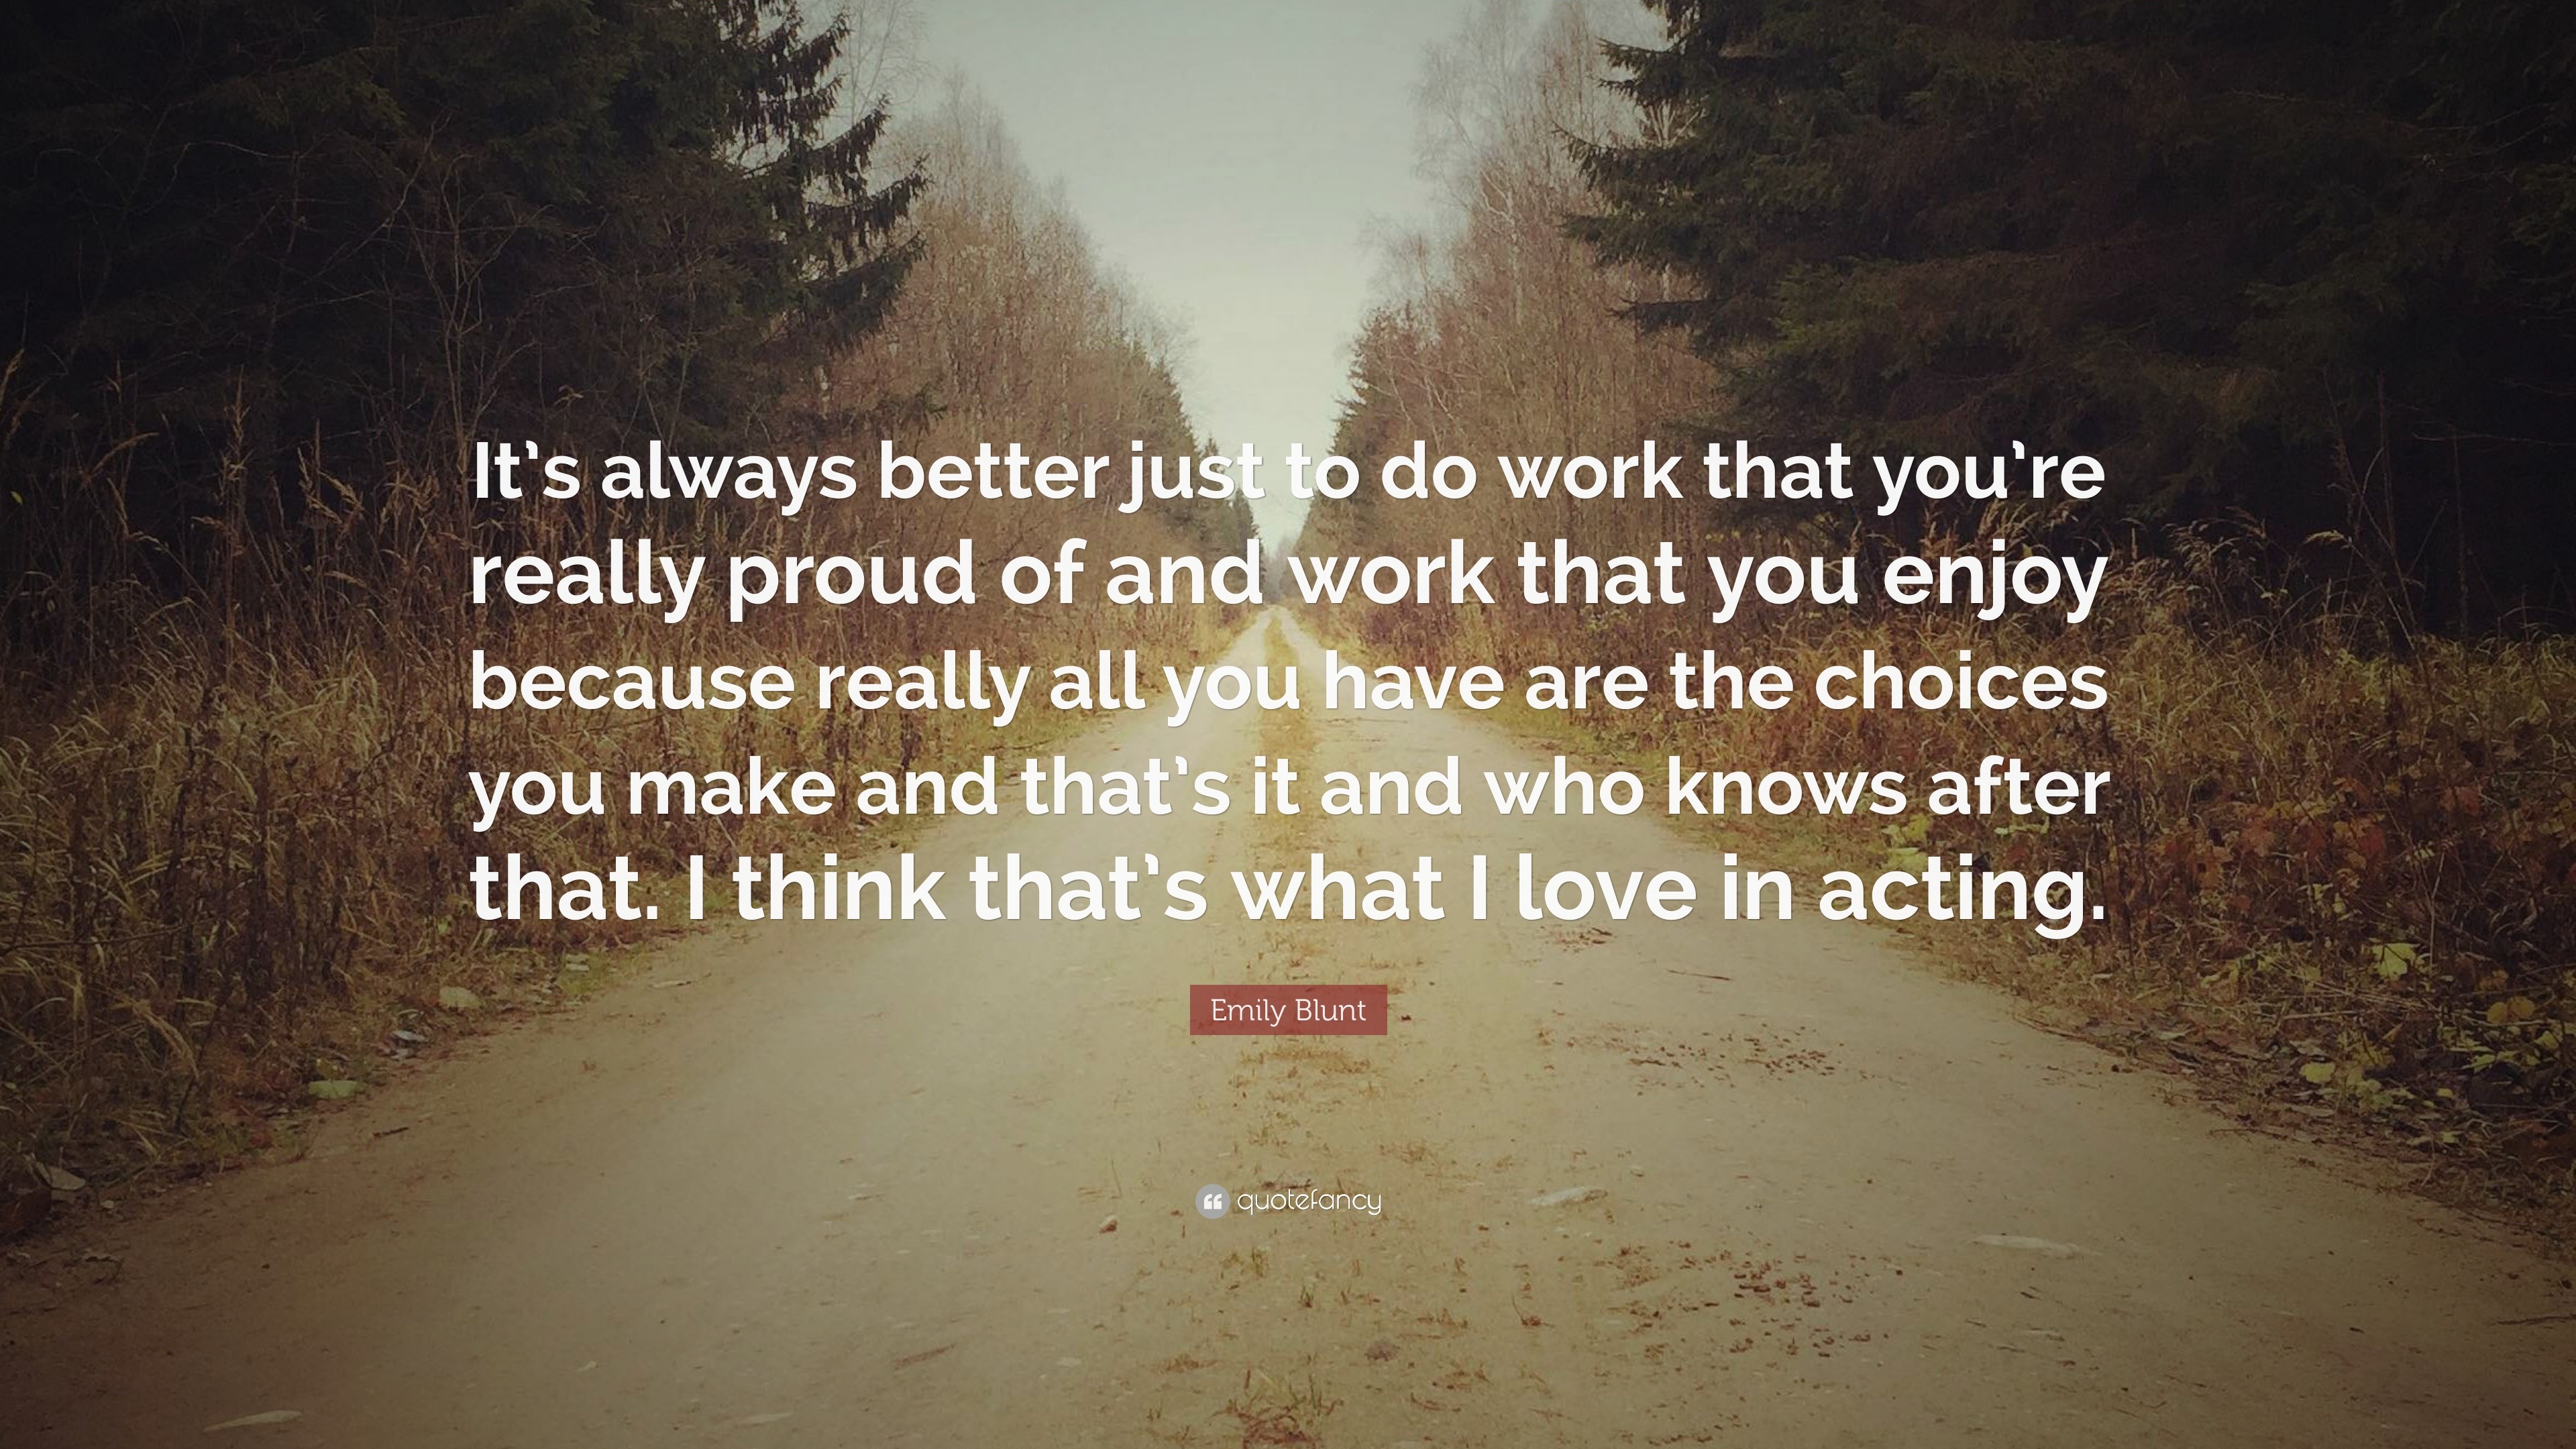 Emily Blunt Quote: “It’s always better just to do work that you’re ...